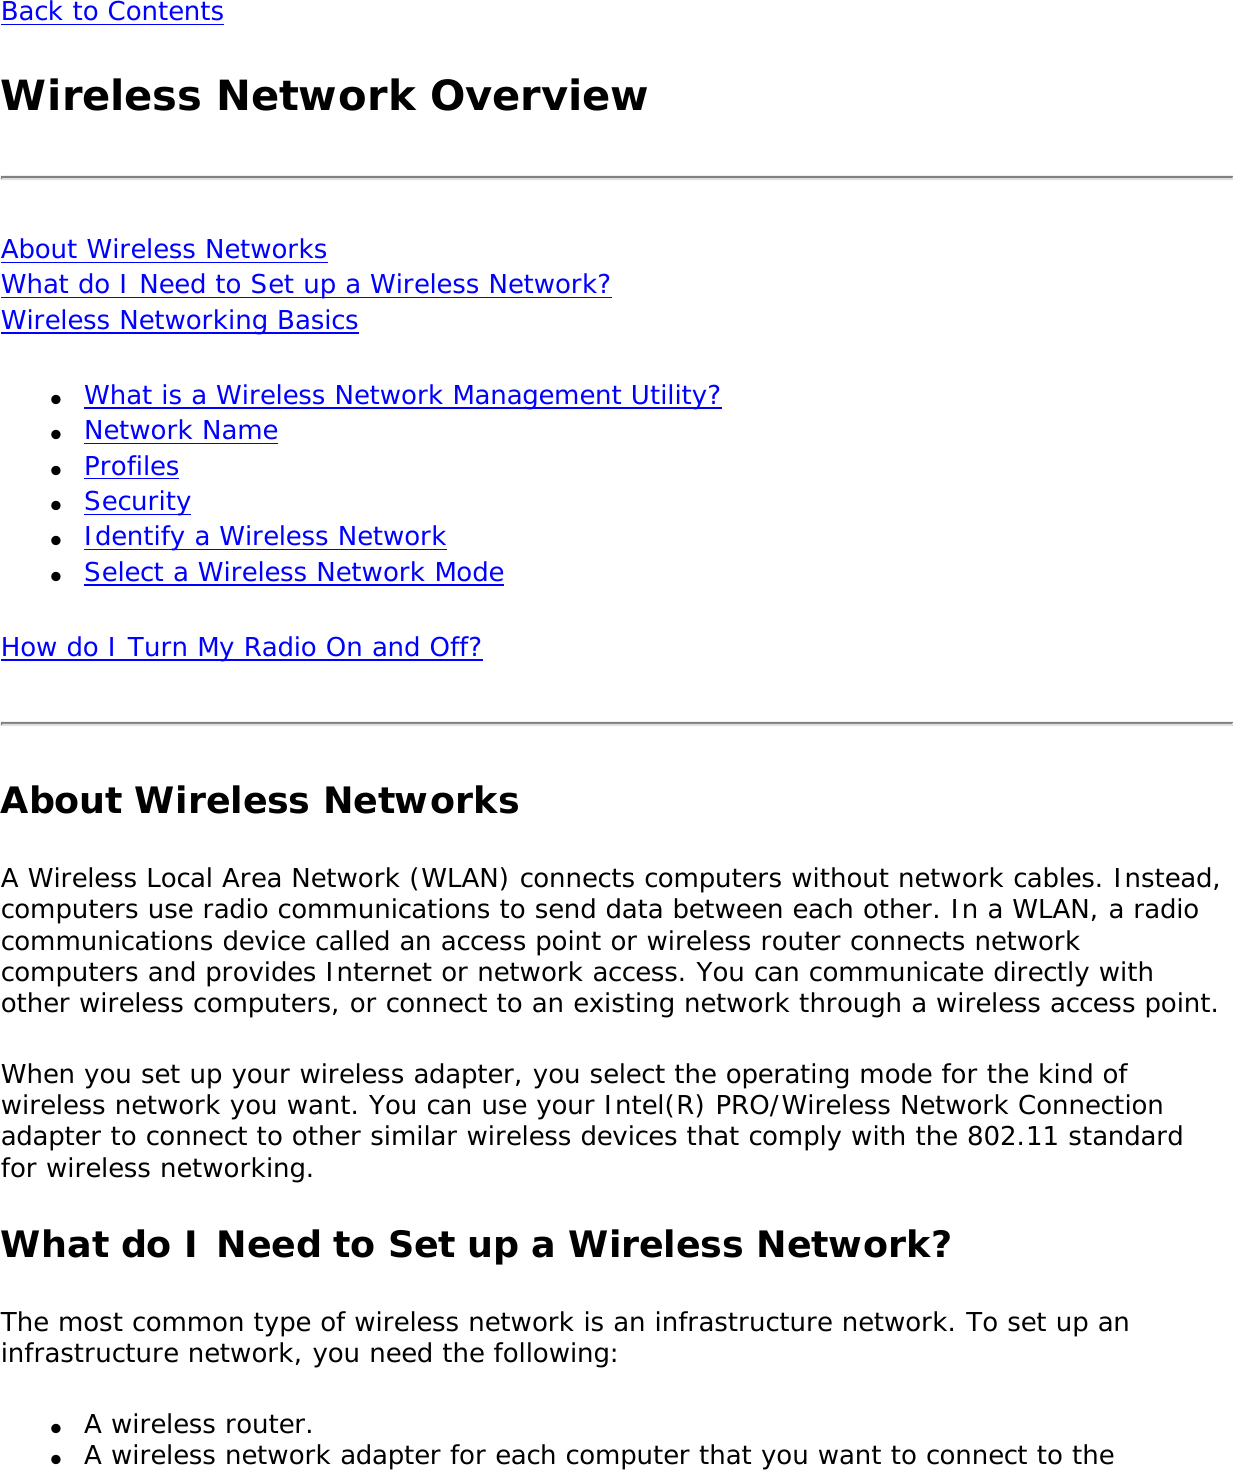 Back to ContentsWireless Network OverviewAbout Wireless Networks What do I Need to Set up a Wireless Network? Wireless Networking Basics ●     What is a Wireless Network Management Utility?●     Network Name●     Profiles●     Security●     Identify a Wireless Network●     Select a Wireless Network ModeHow do I Turn My Radio On and Off?About Wireless NetworksA Wireless Local Area Network (WLAN) connects computers without network cables. Instead, computers use radio communications to send data between each other. In a WLAN, a radio communications device called an access point or wireless router connects network computers and provides Internet or network access. You can communicate directly with other wireless computers, or connect to an existing network through a wireless access point. When you set up your wireless adapter, you select the operating mode for the kind of wireless network you want. You can use your Intel(R) PRO/Wireless Network Connection adapter to connect to other similar wireless devices that comply with the 802.11 standard for wireless networking. What do I Need to Set up a Wireless Network? The most common type of wireless network is an infrastructure network. To set up an infrastructure network, you need the following:●     A wireless router.●     A wireless network adapter for each computer that you want to connect to the 